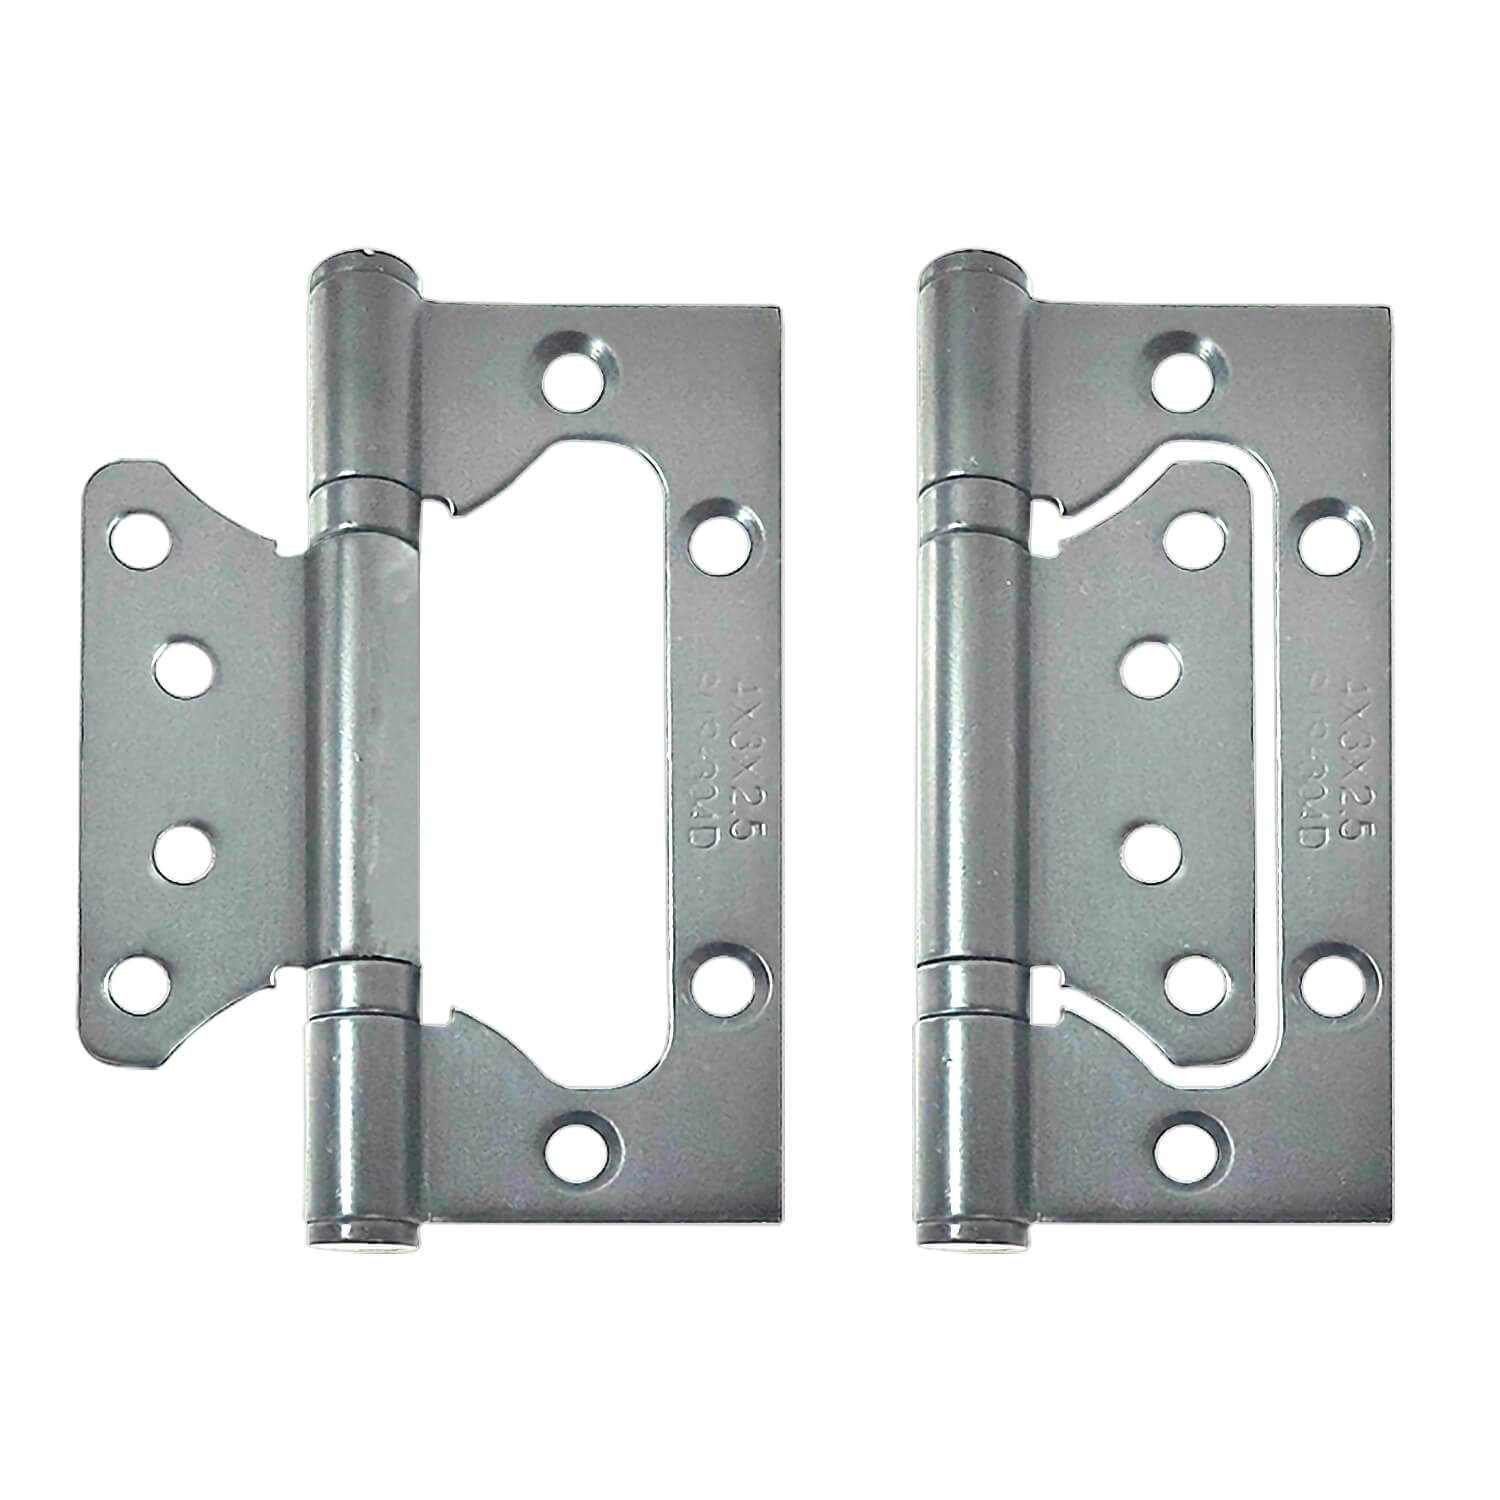 PorteGuard Butterfly Door Hinges (3 Pack) - Silver